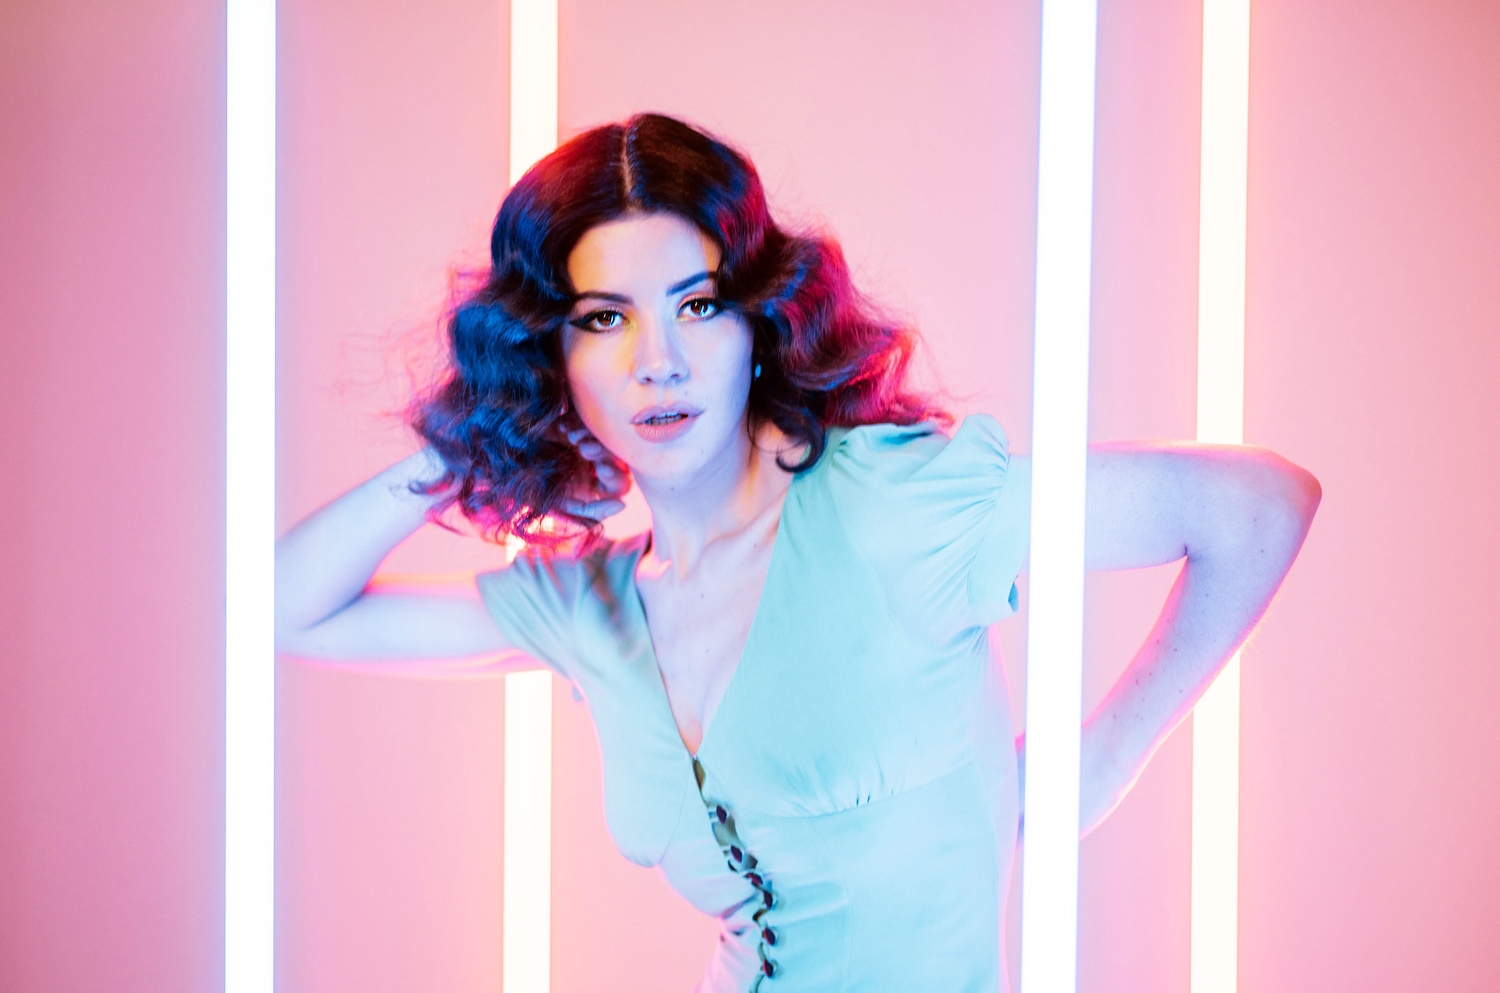 Froot shoot: see extra photos from DIY's Marina and the Diamonds cover shoot